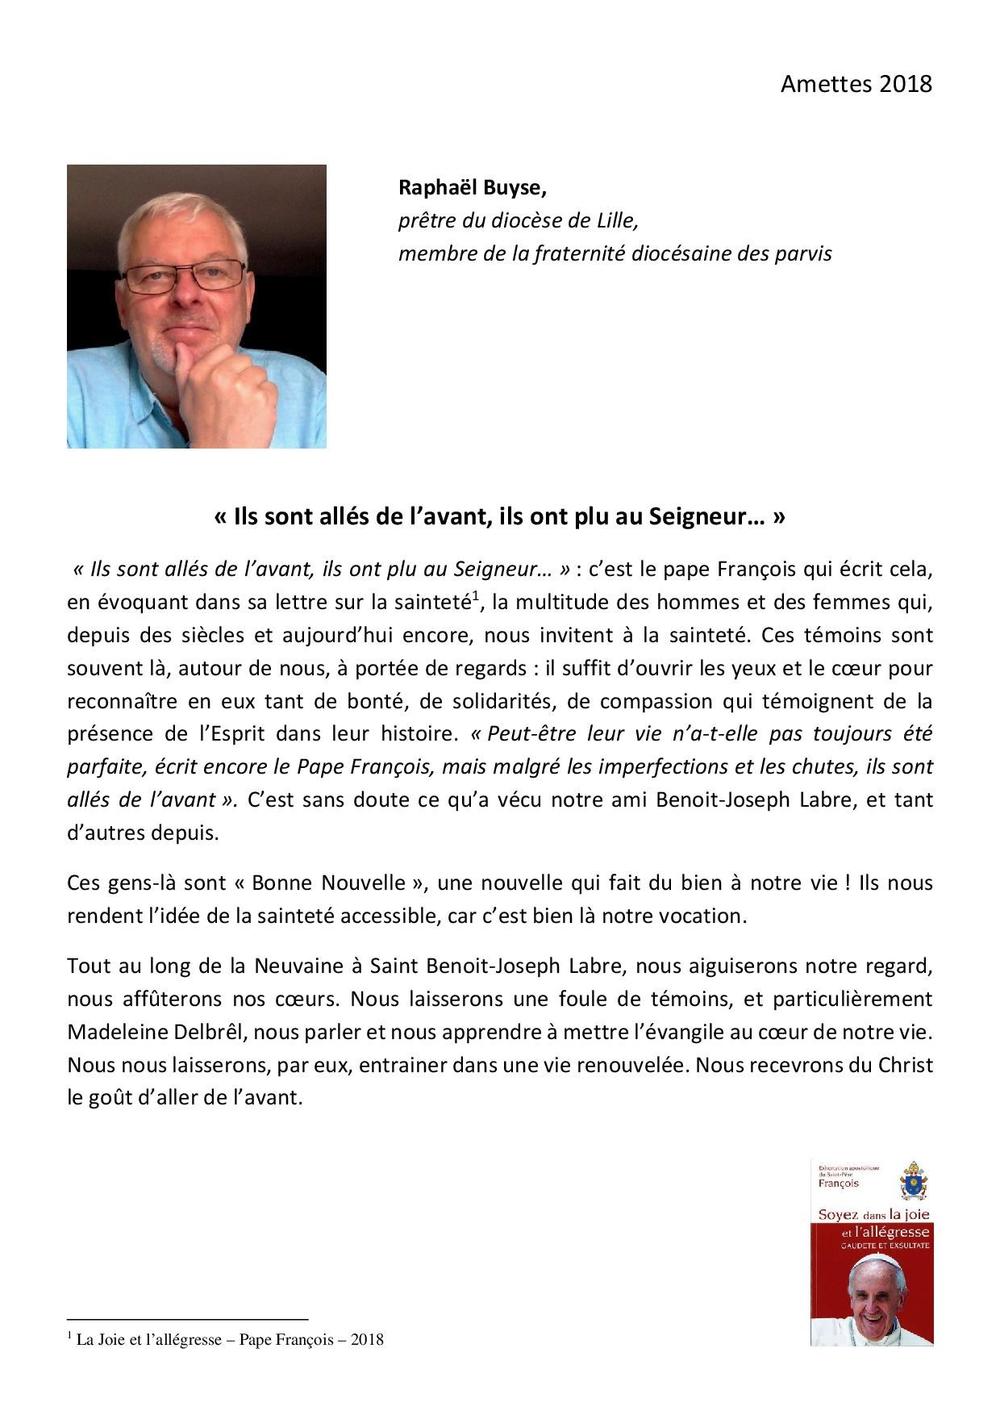 tract Amettes aout 2018 p2